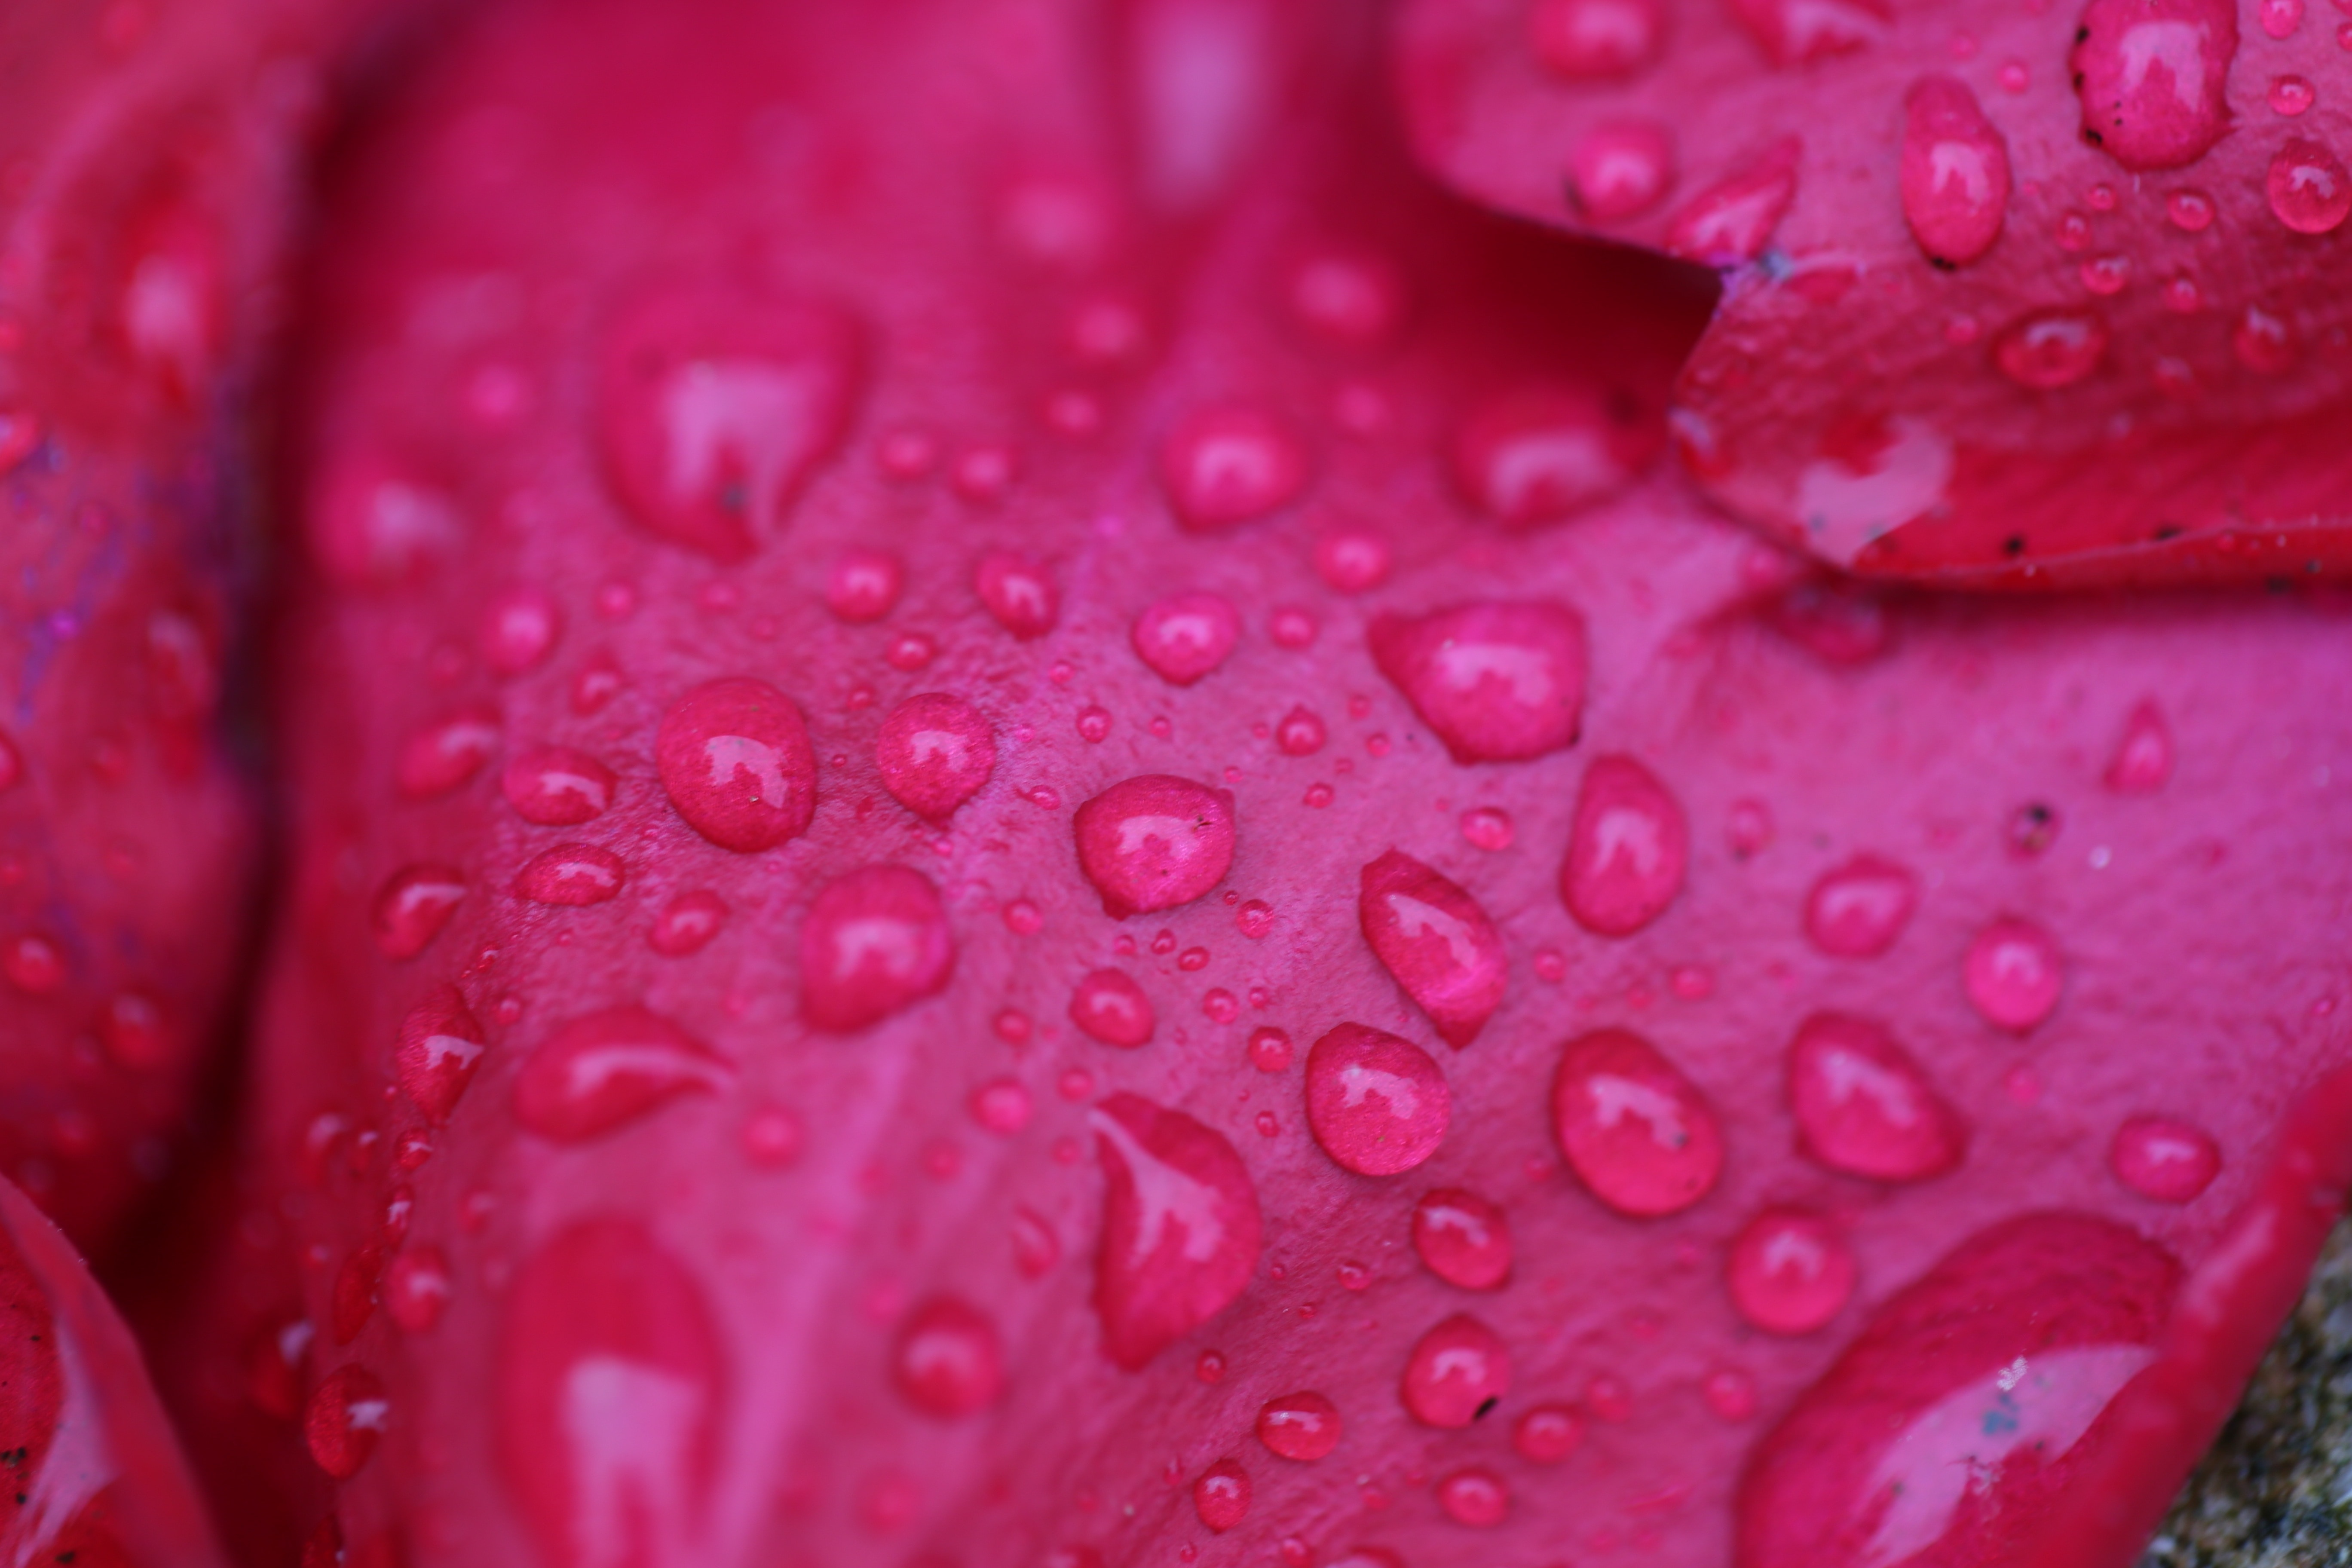 micro photography  of water droplets on flower petals